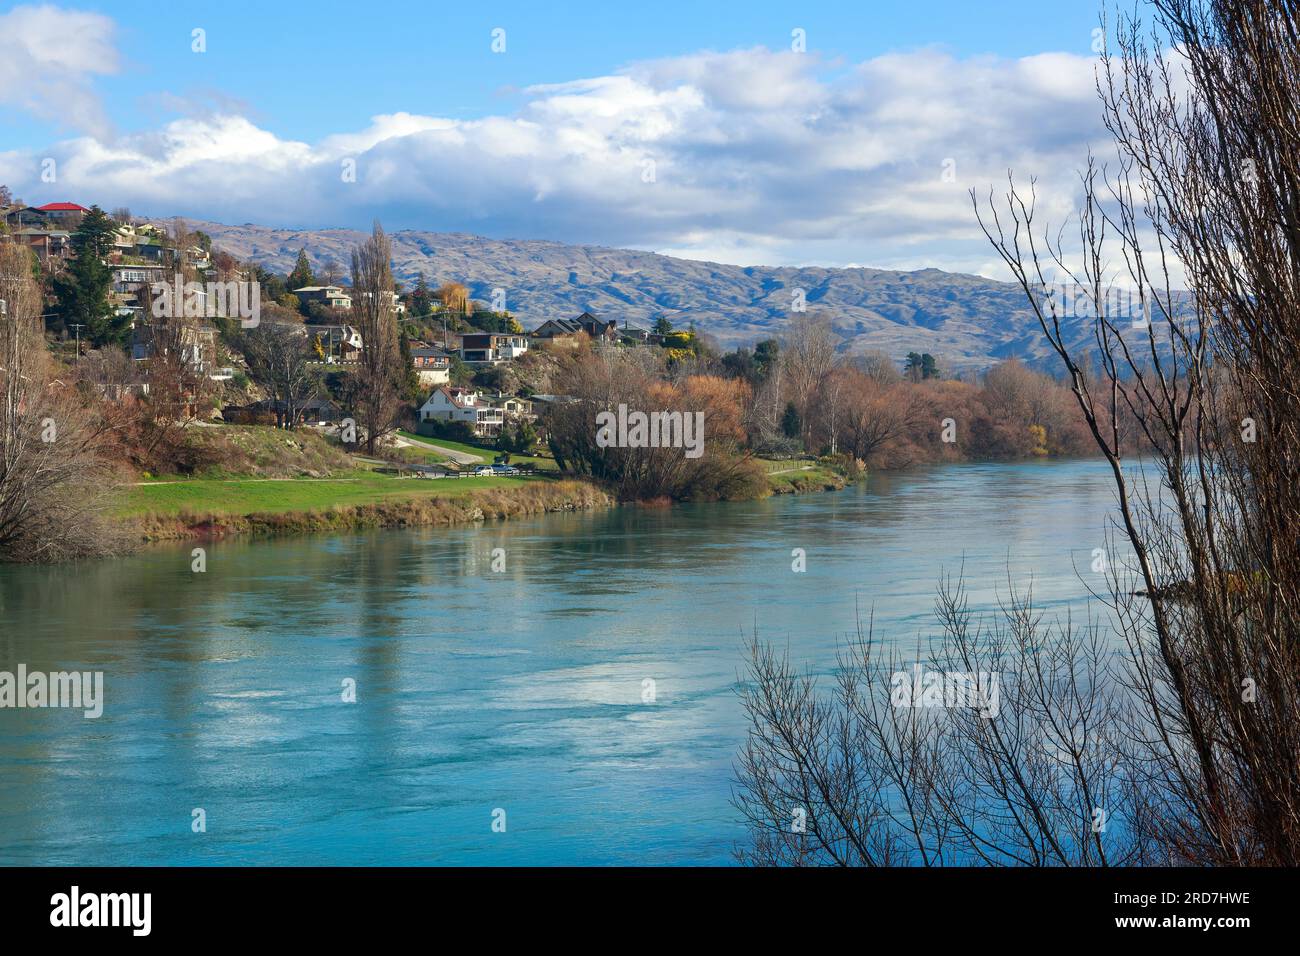 The Clutha River passing through the town of Alexandra in the South Island of New Zealand Stock Photo